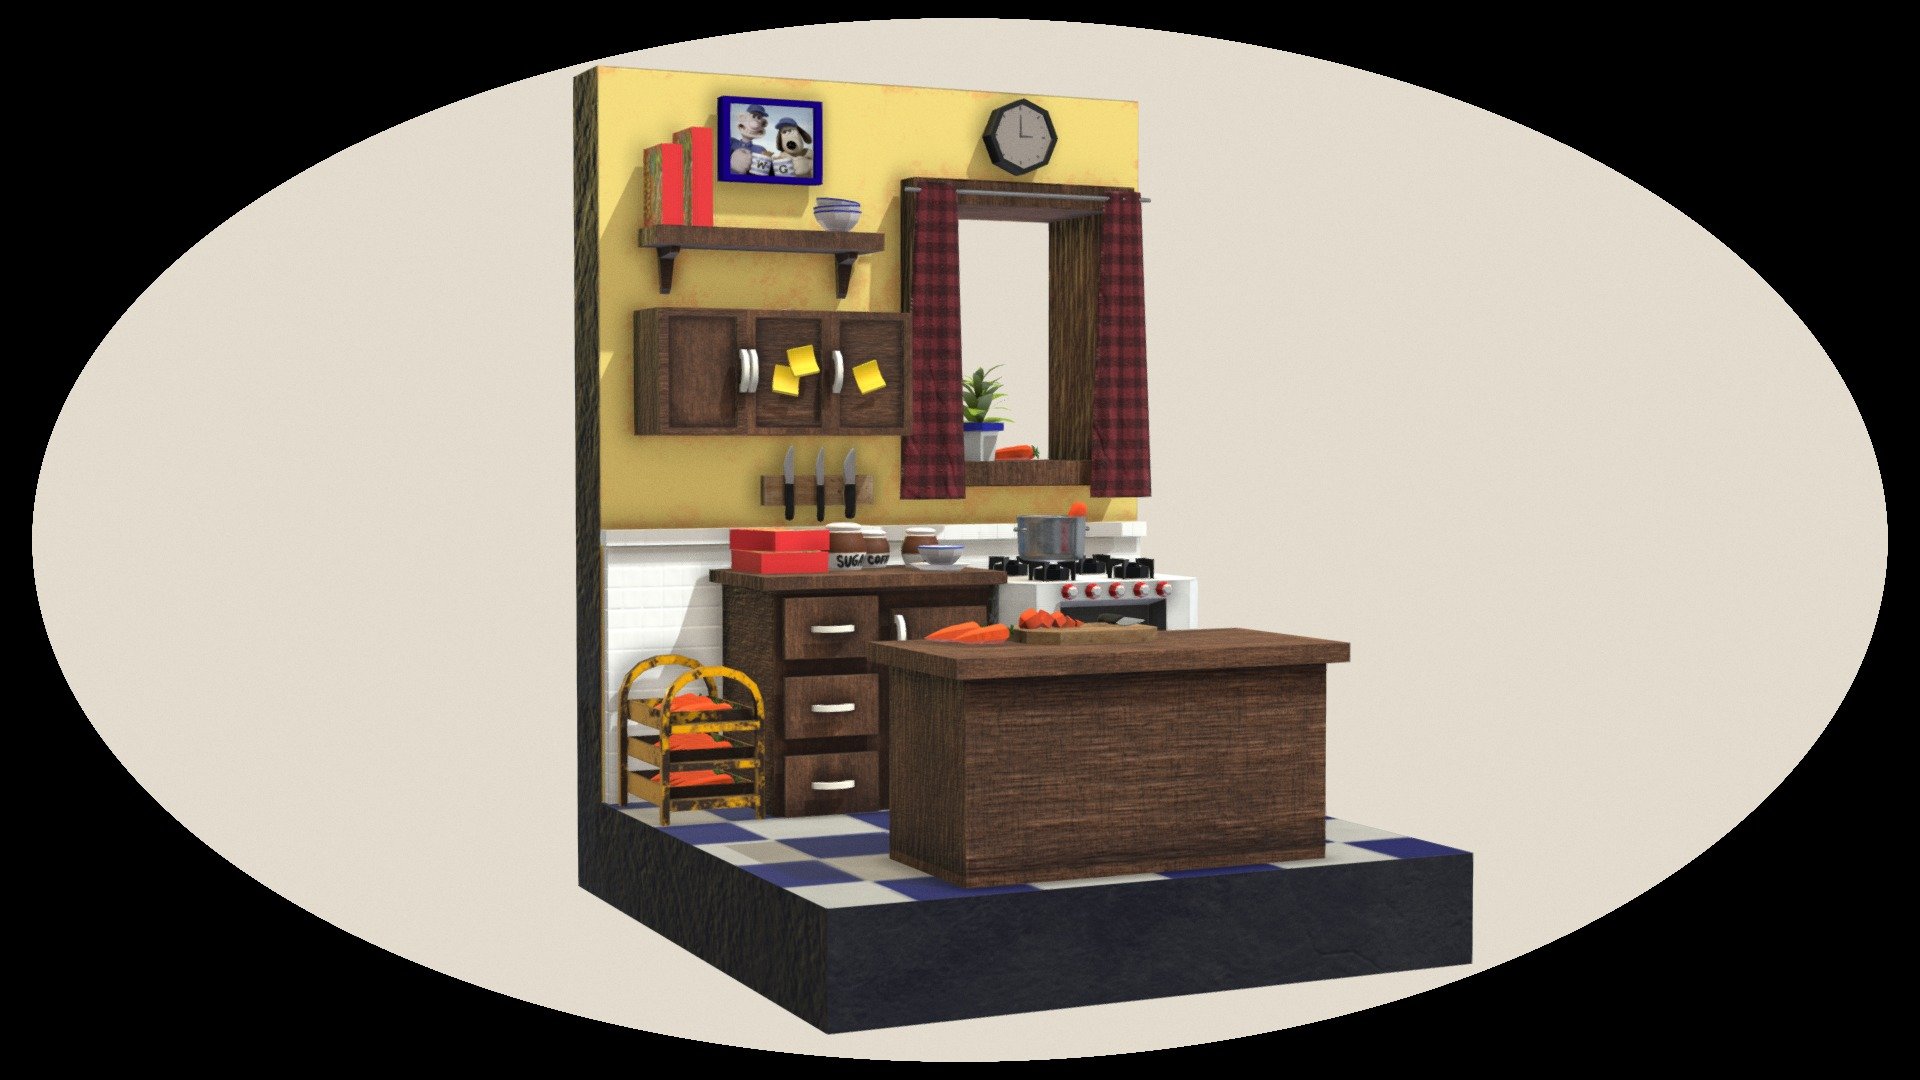 Wallace and gromit kitchen fanart //low poly